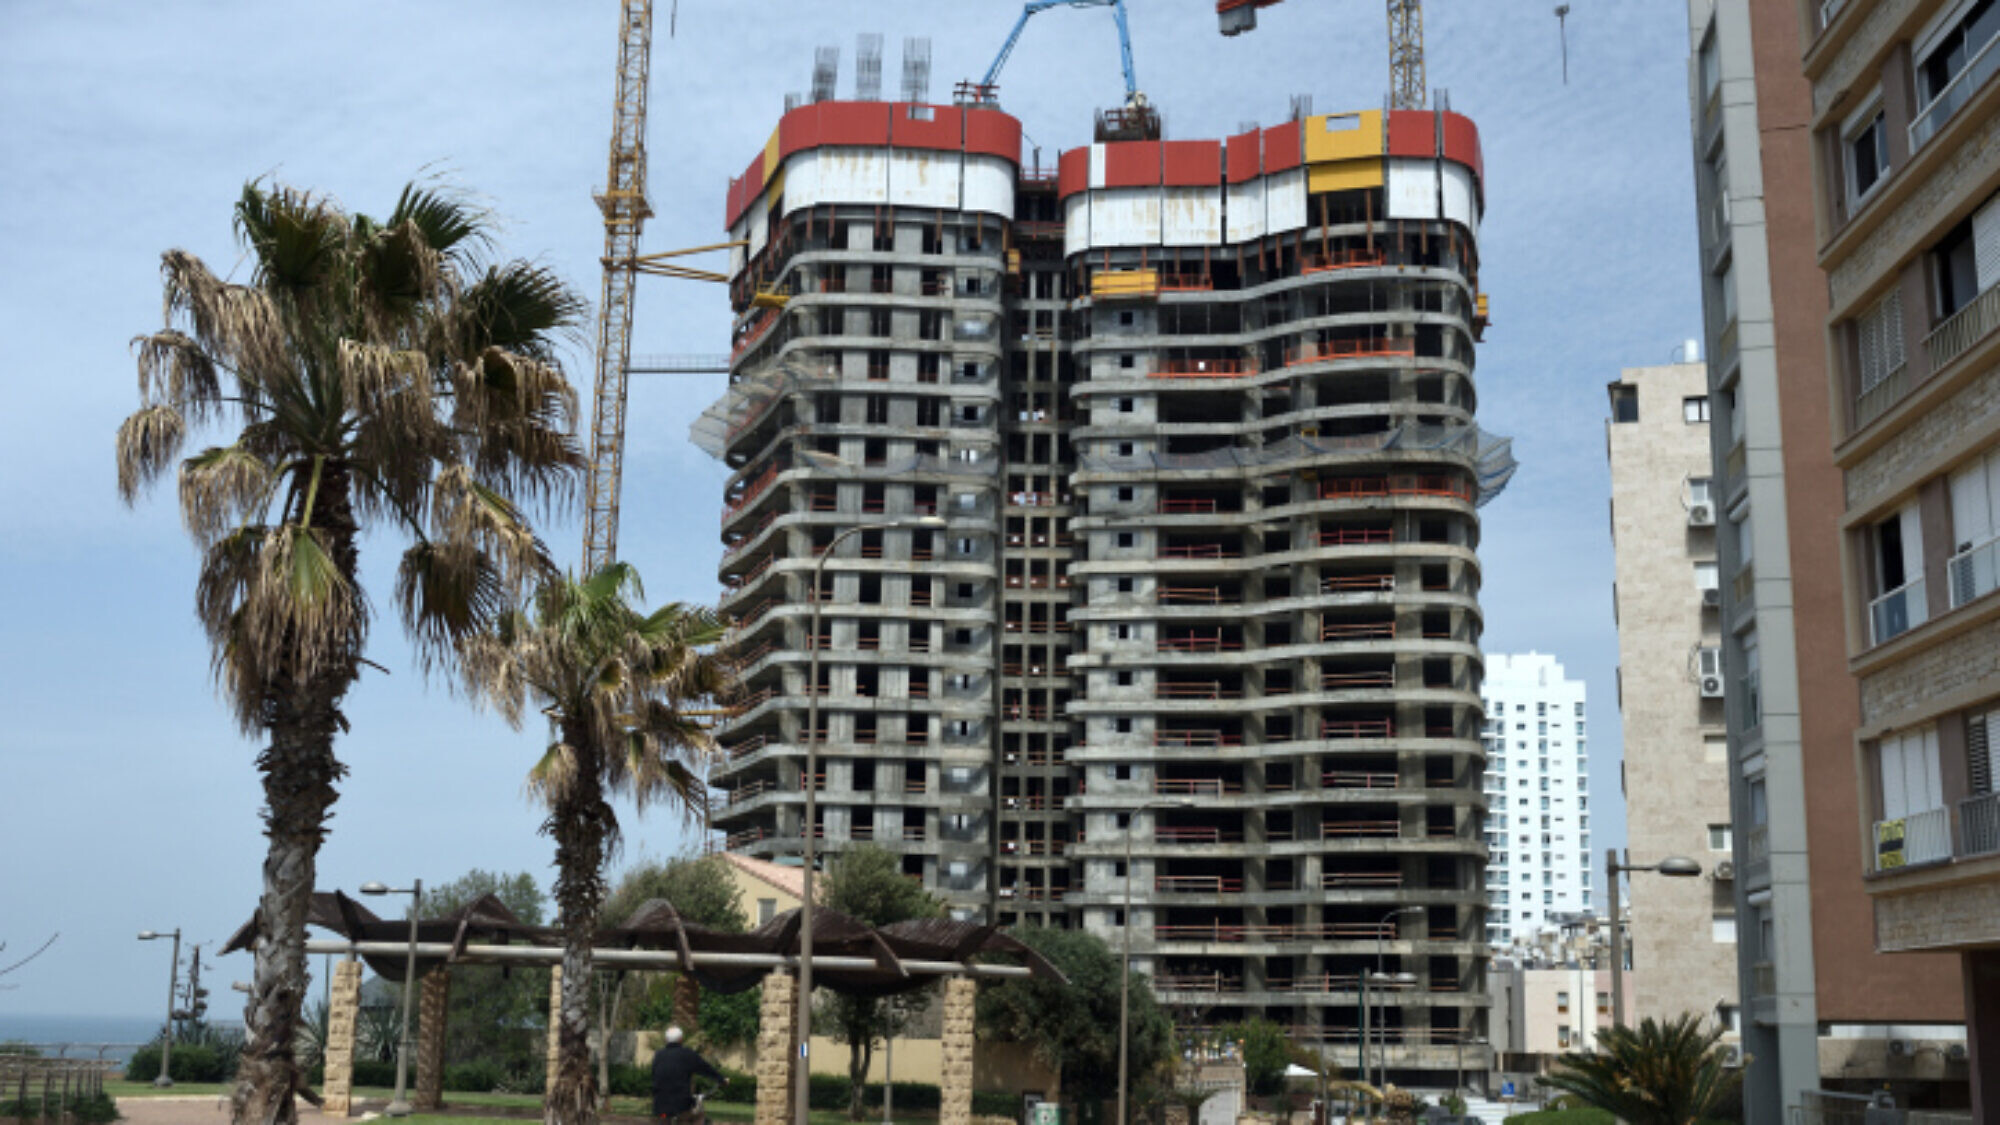 A construction site of new residential buildings in the costal city of Netanya on March 26, 2020. Photo by Gili Yaari/Flash90.